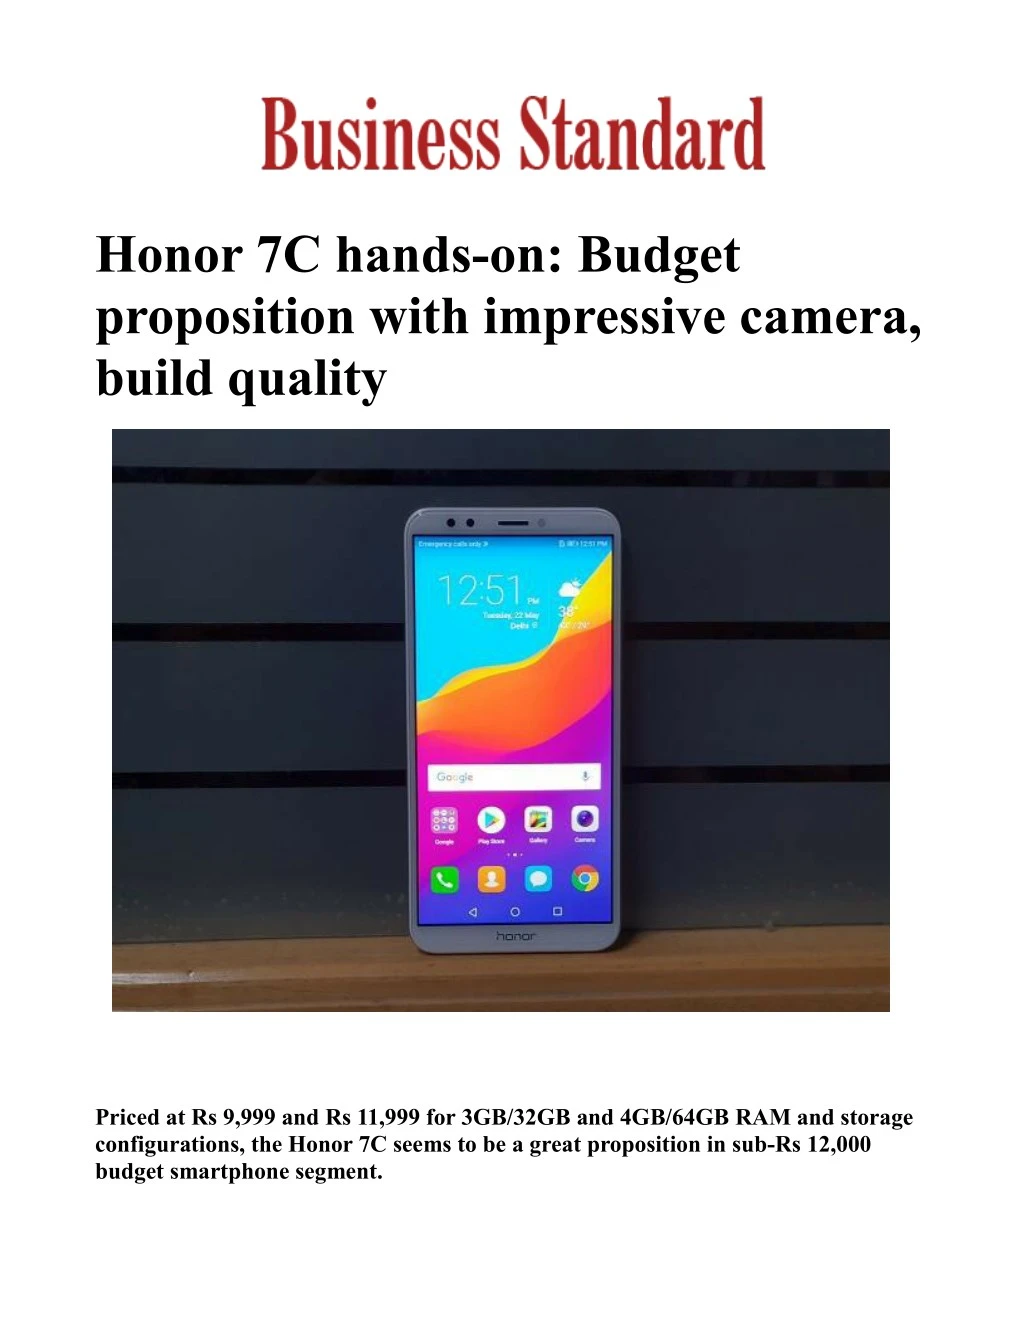 honor 7c hands on budget proposition with